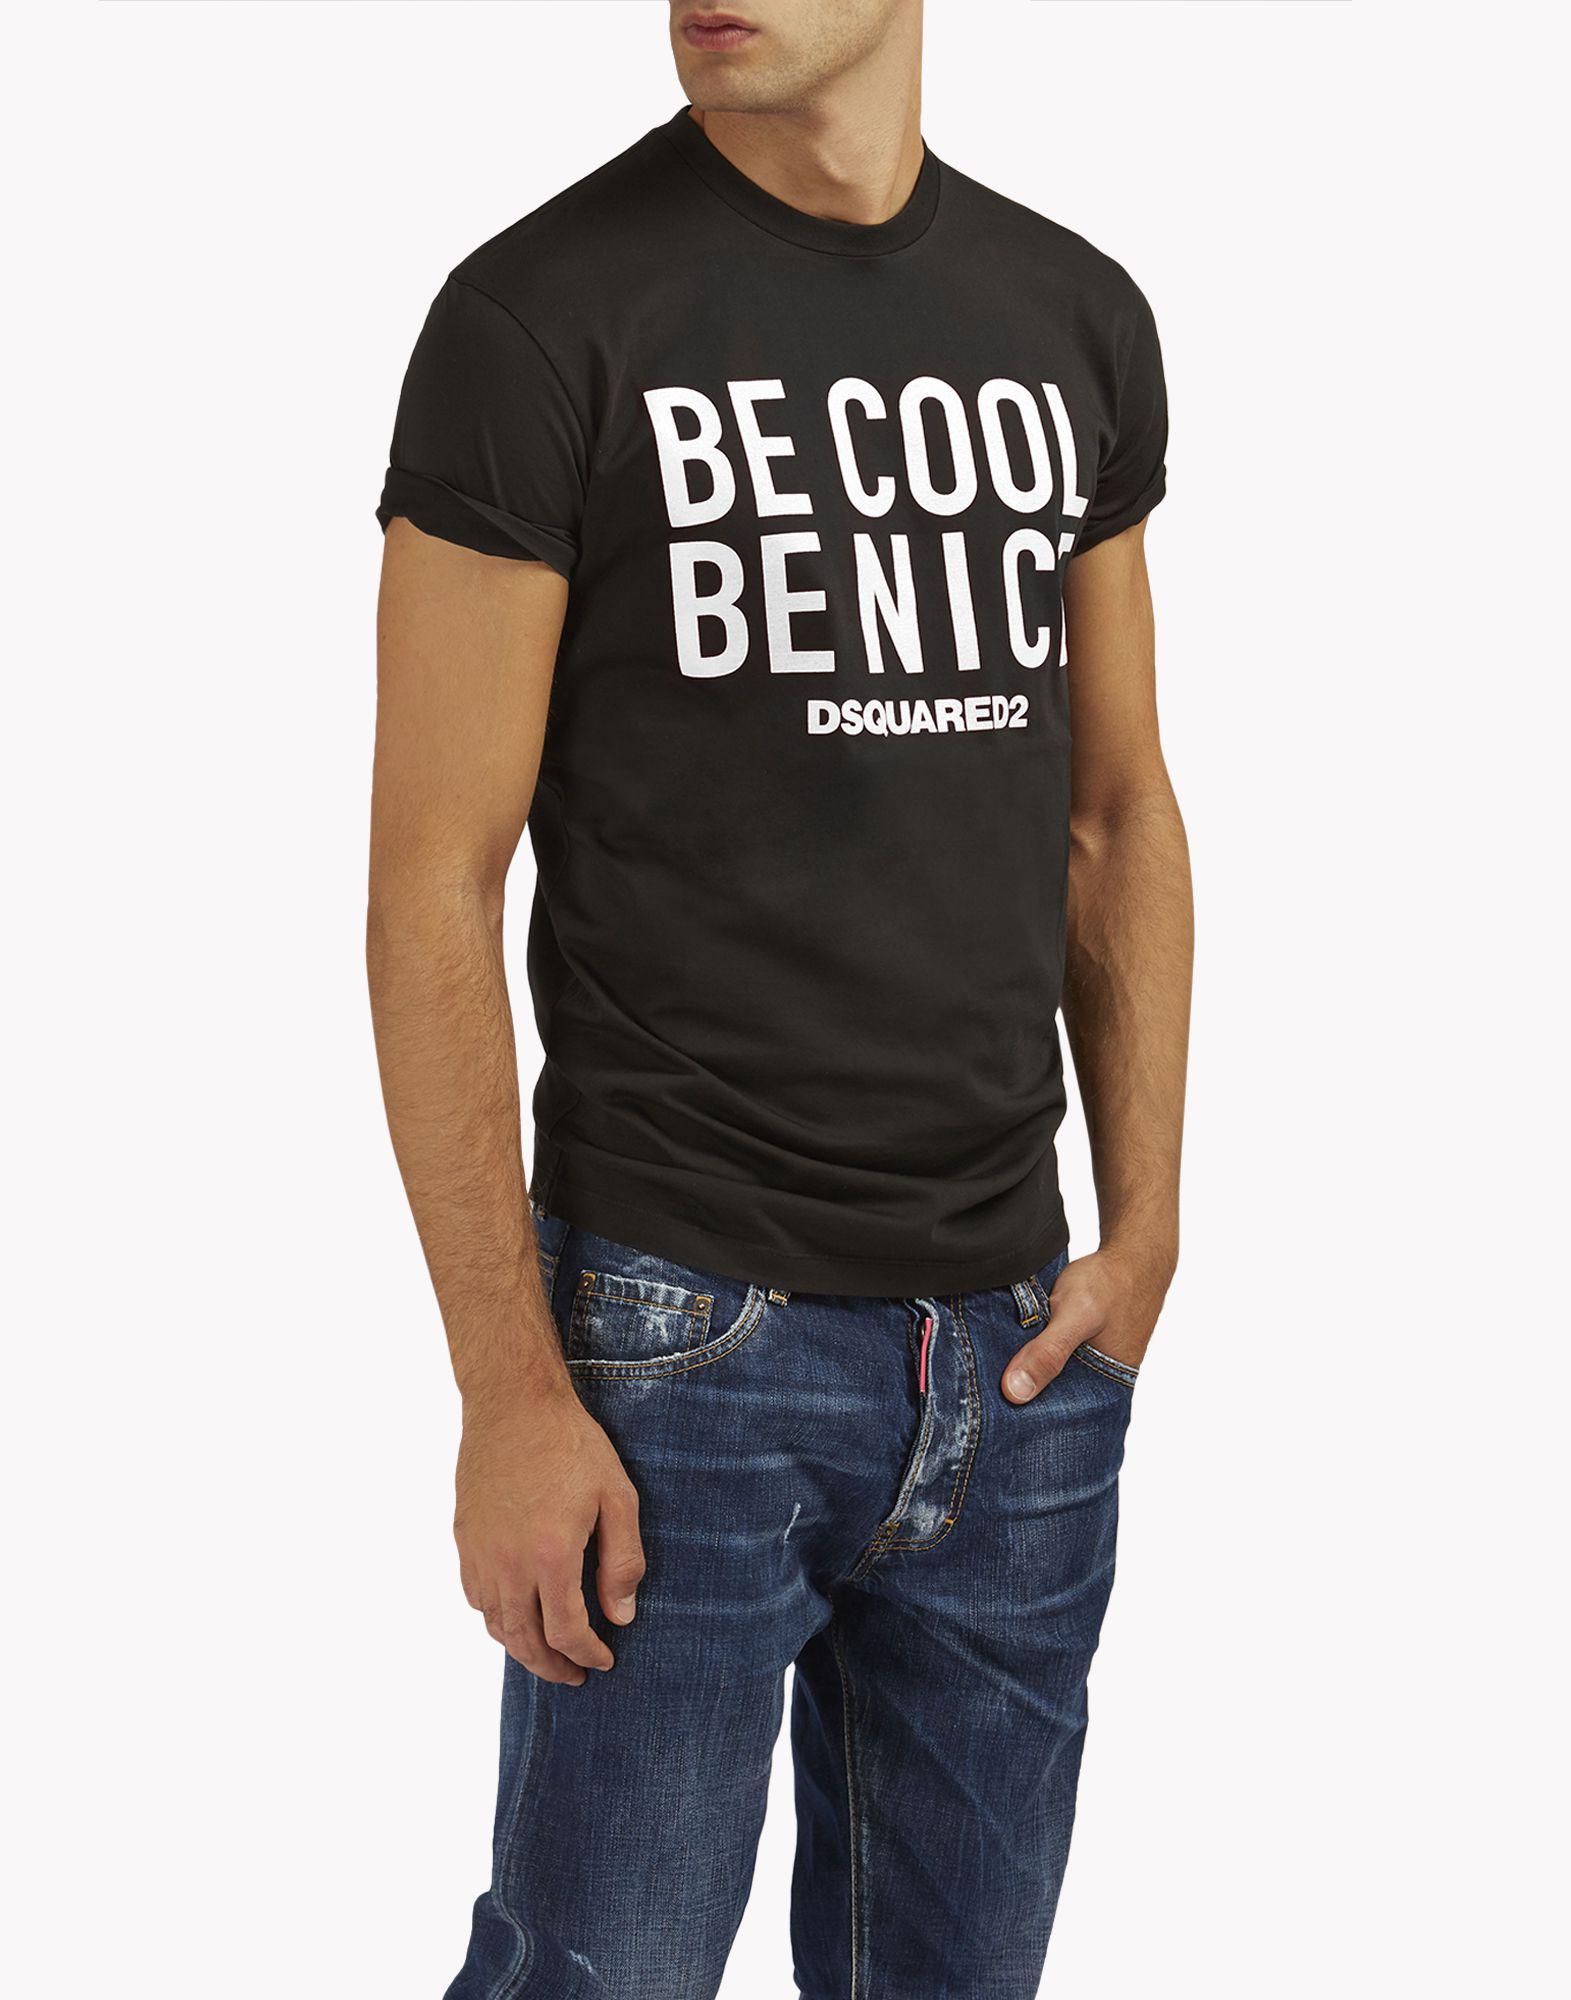 dsquared be cool be nice t shirt, NESSI x COOL BE NICE | Violante -  themaintenancecorner.com